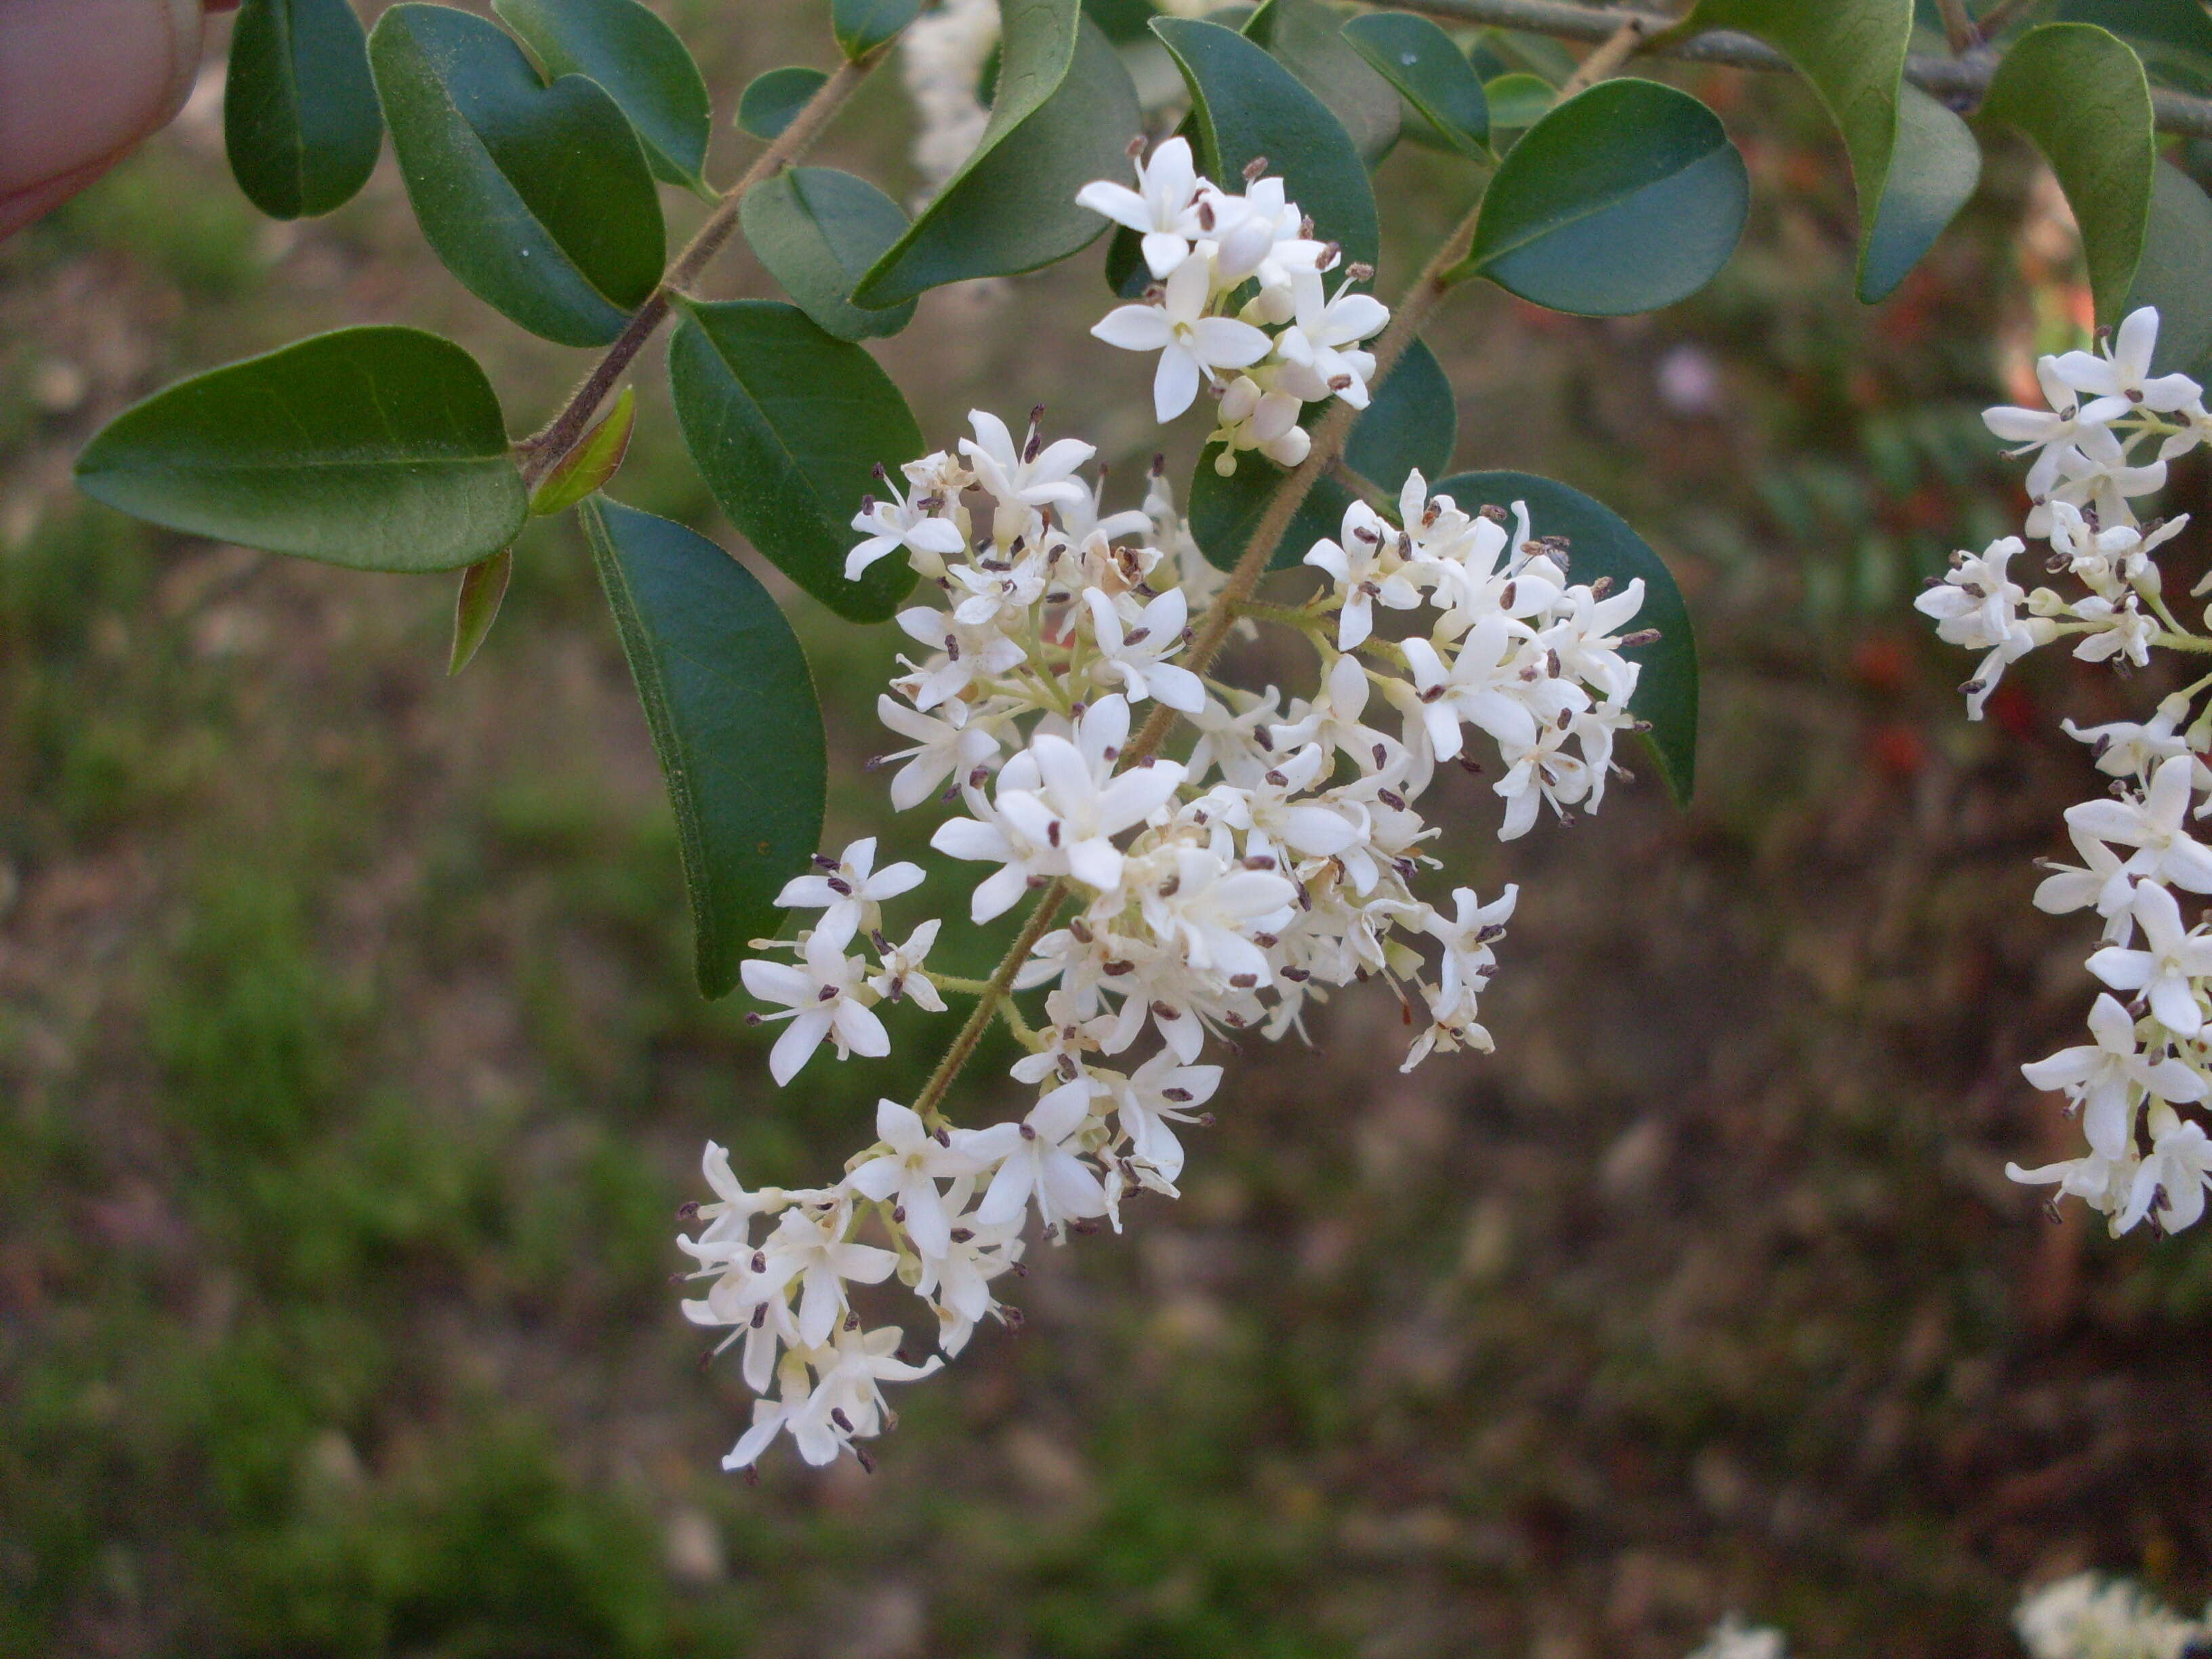 Image of Chinese privet